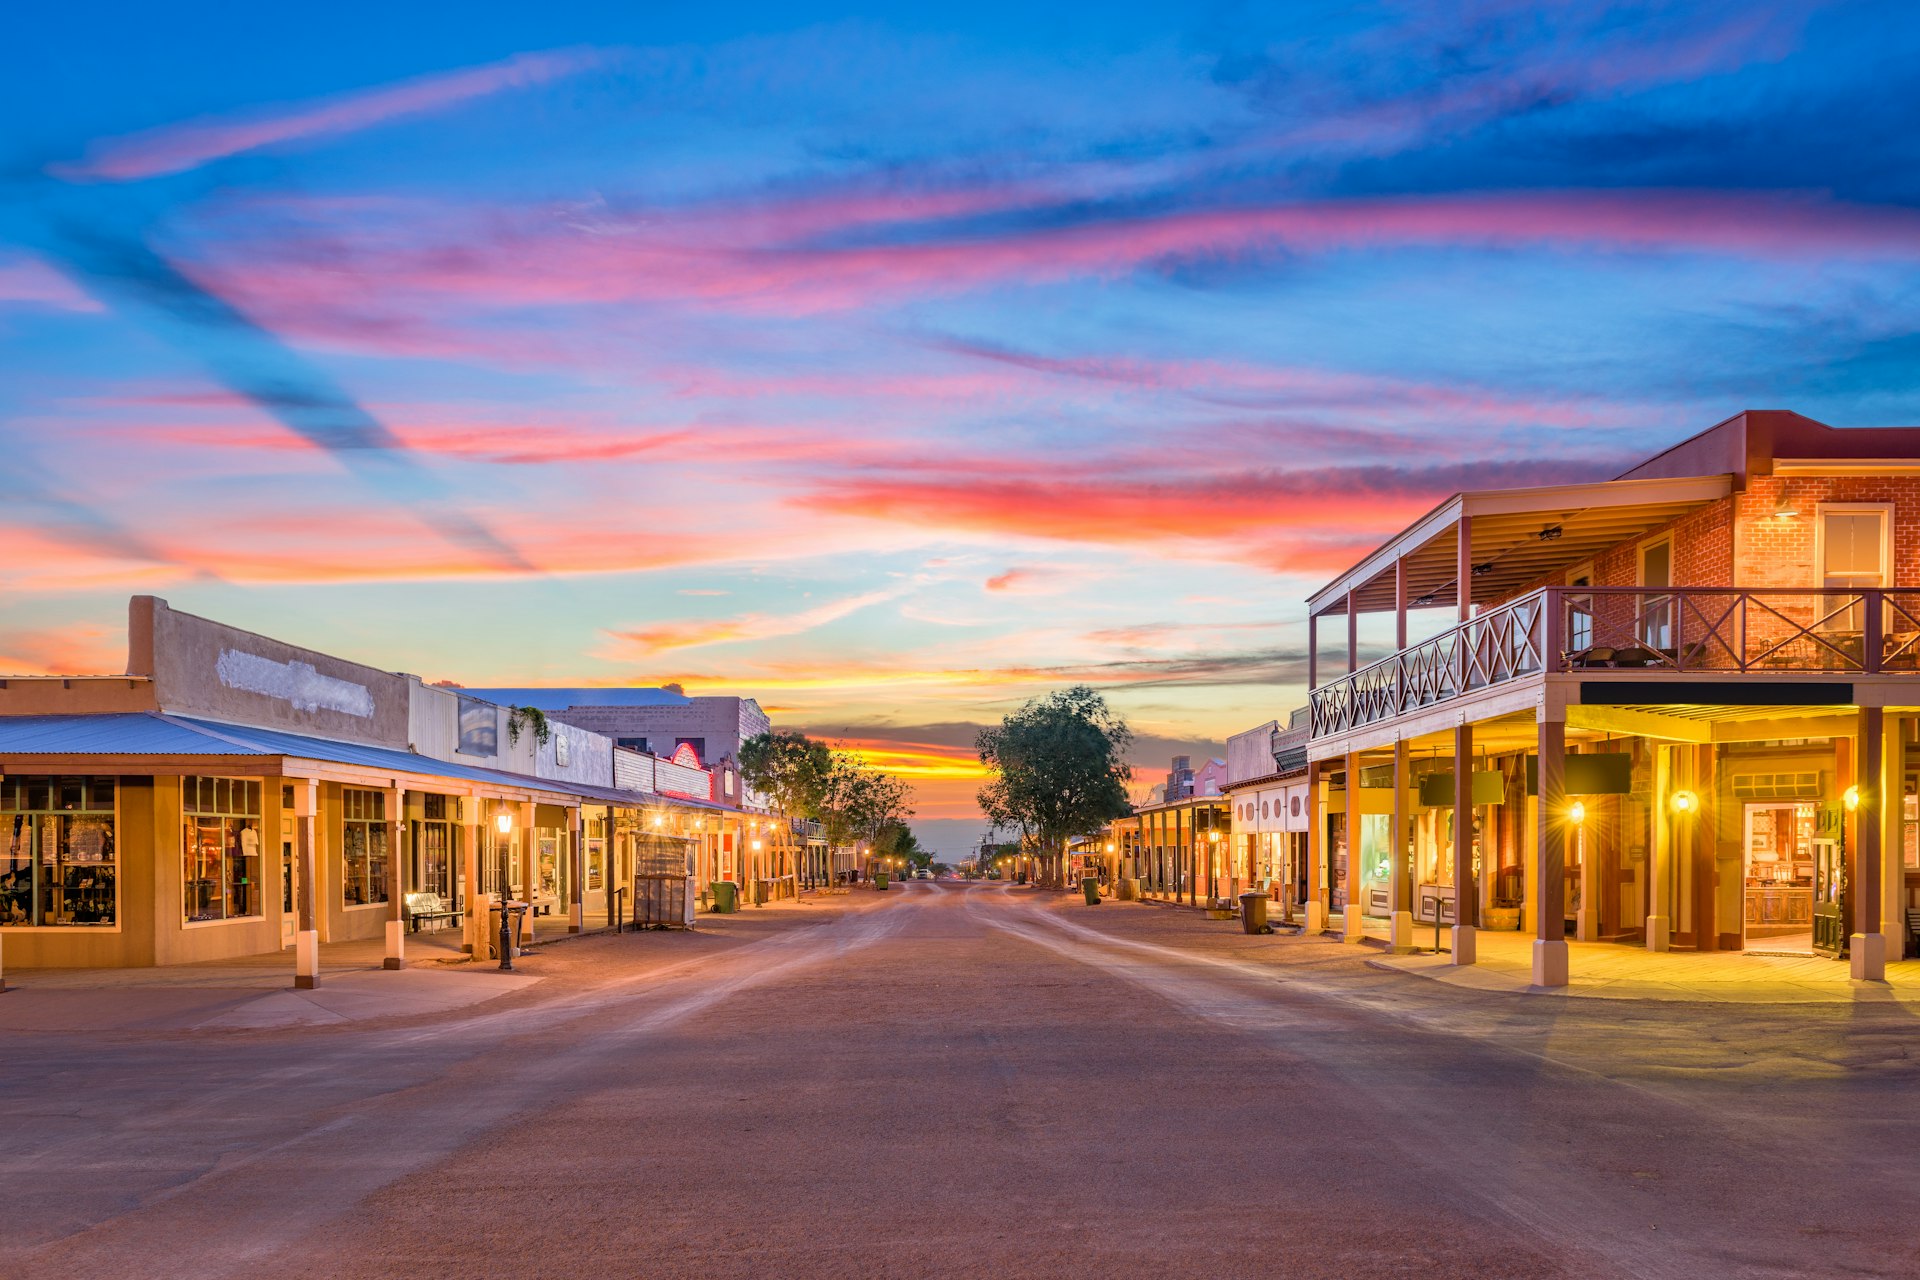 Sunset at America's “Too Tough to Die” town Tombstone, Arizona